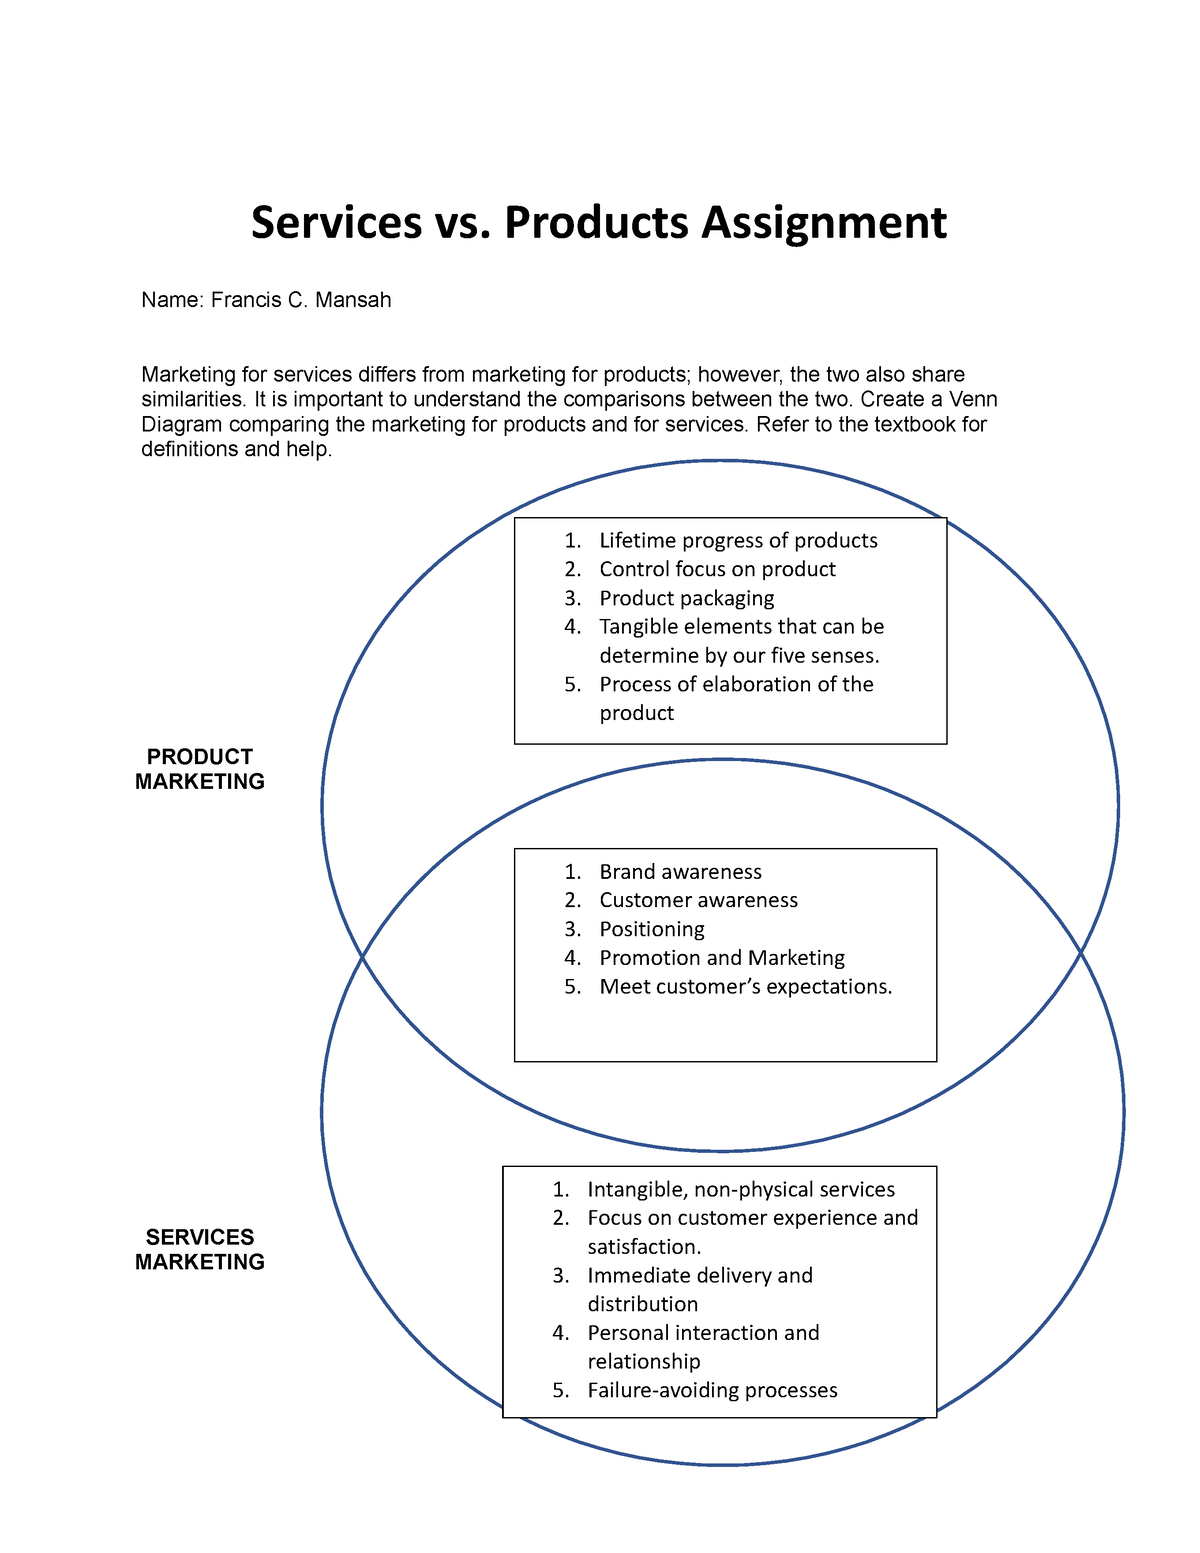 w06 assignment services vs. products